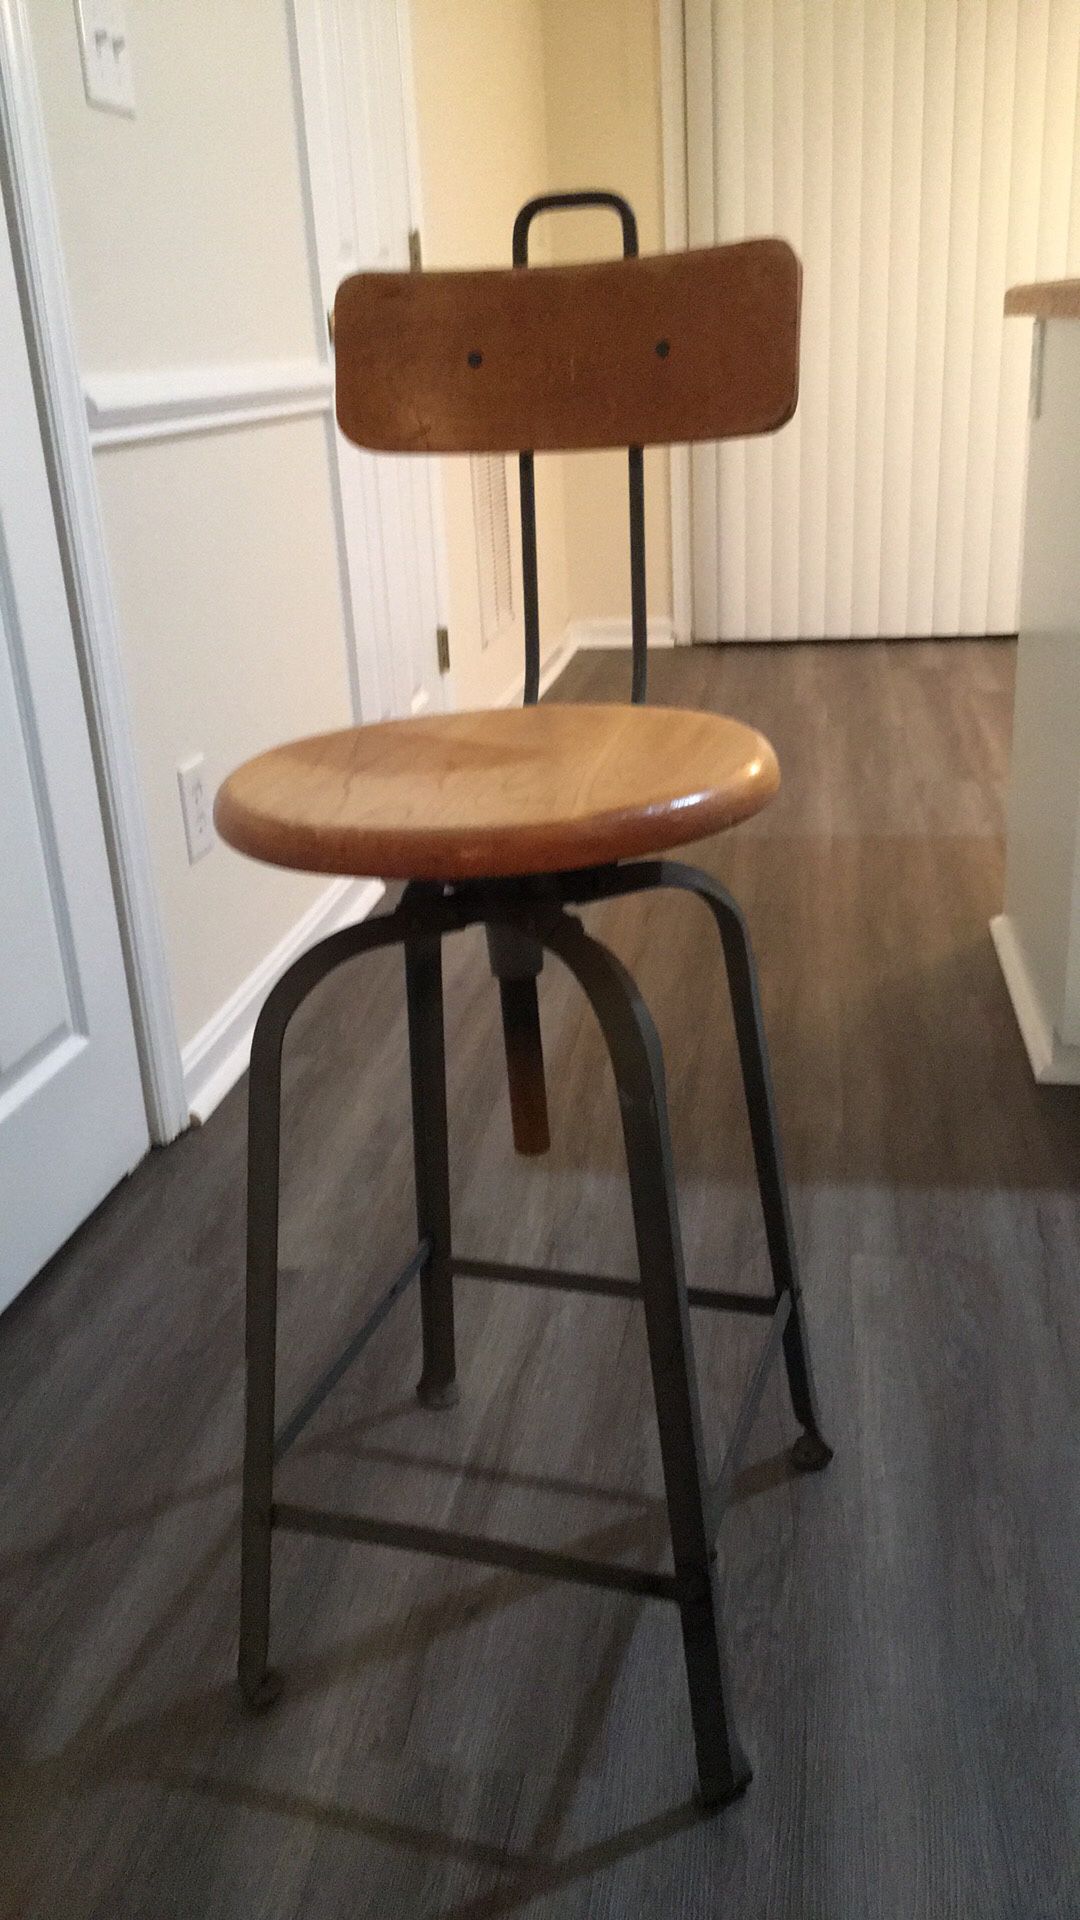 Artist/Drafting chair—Awesome find!